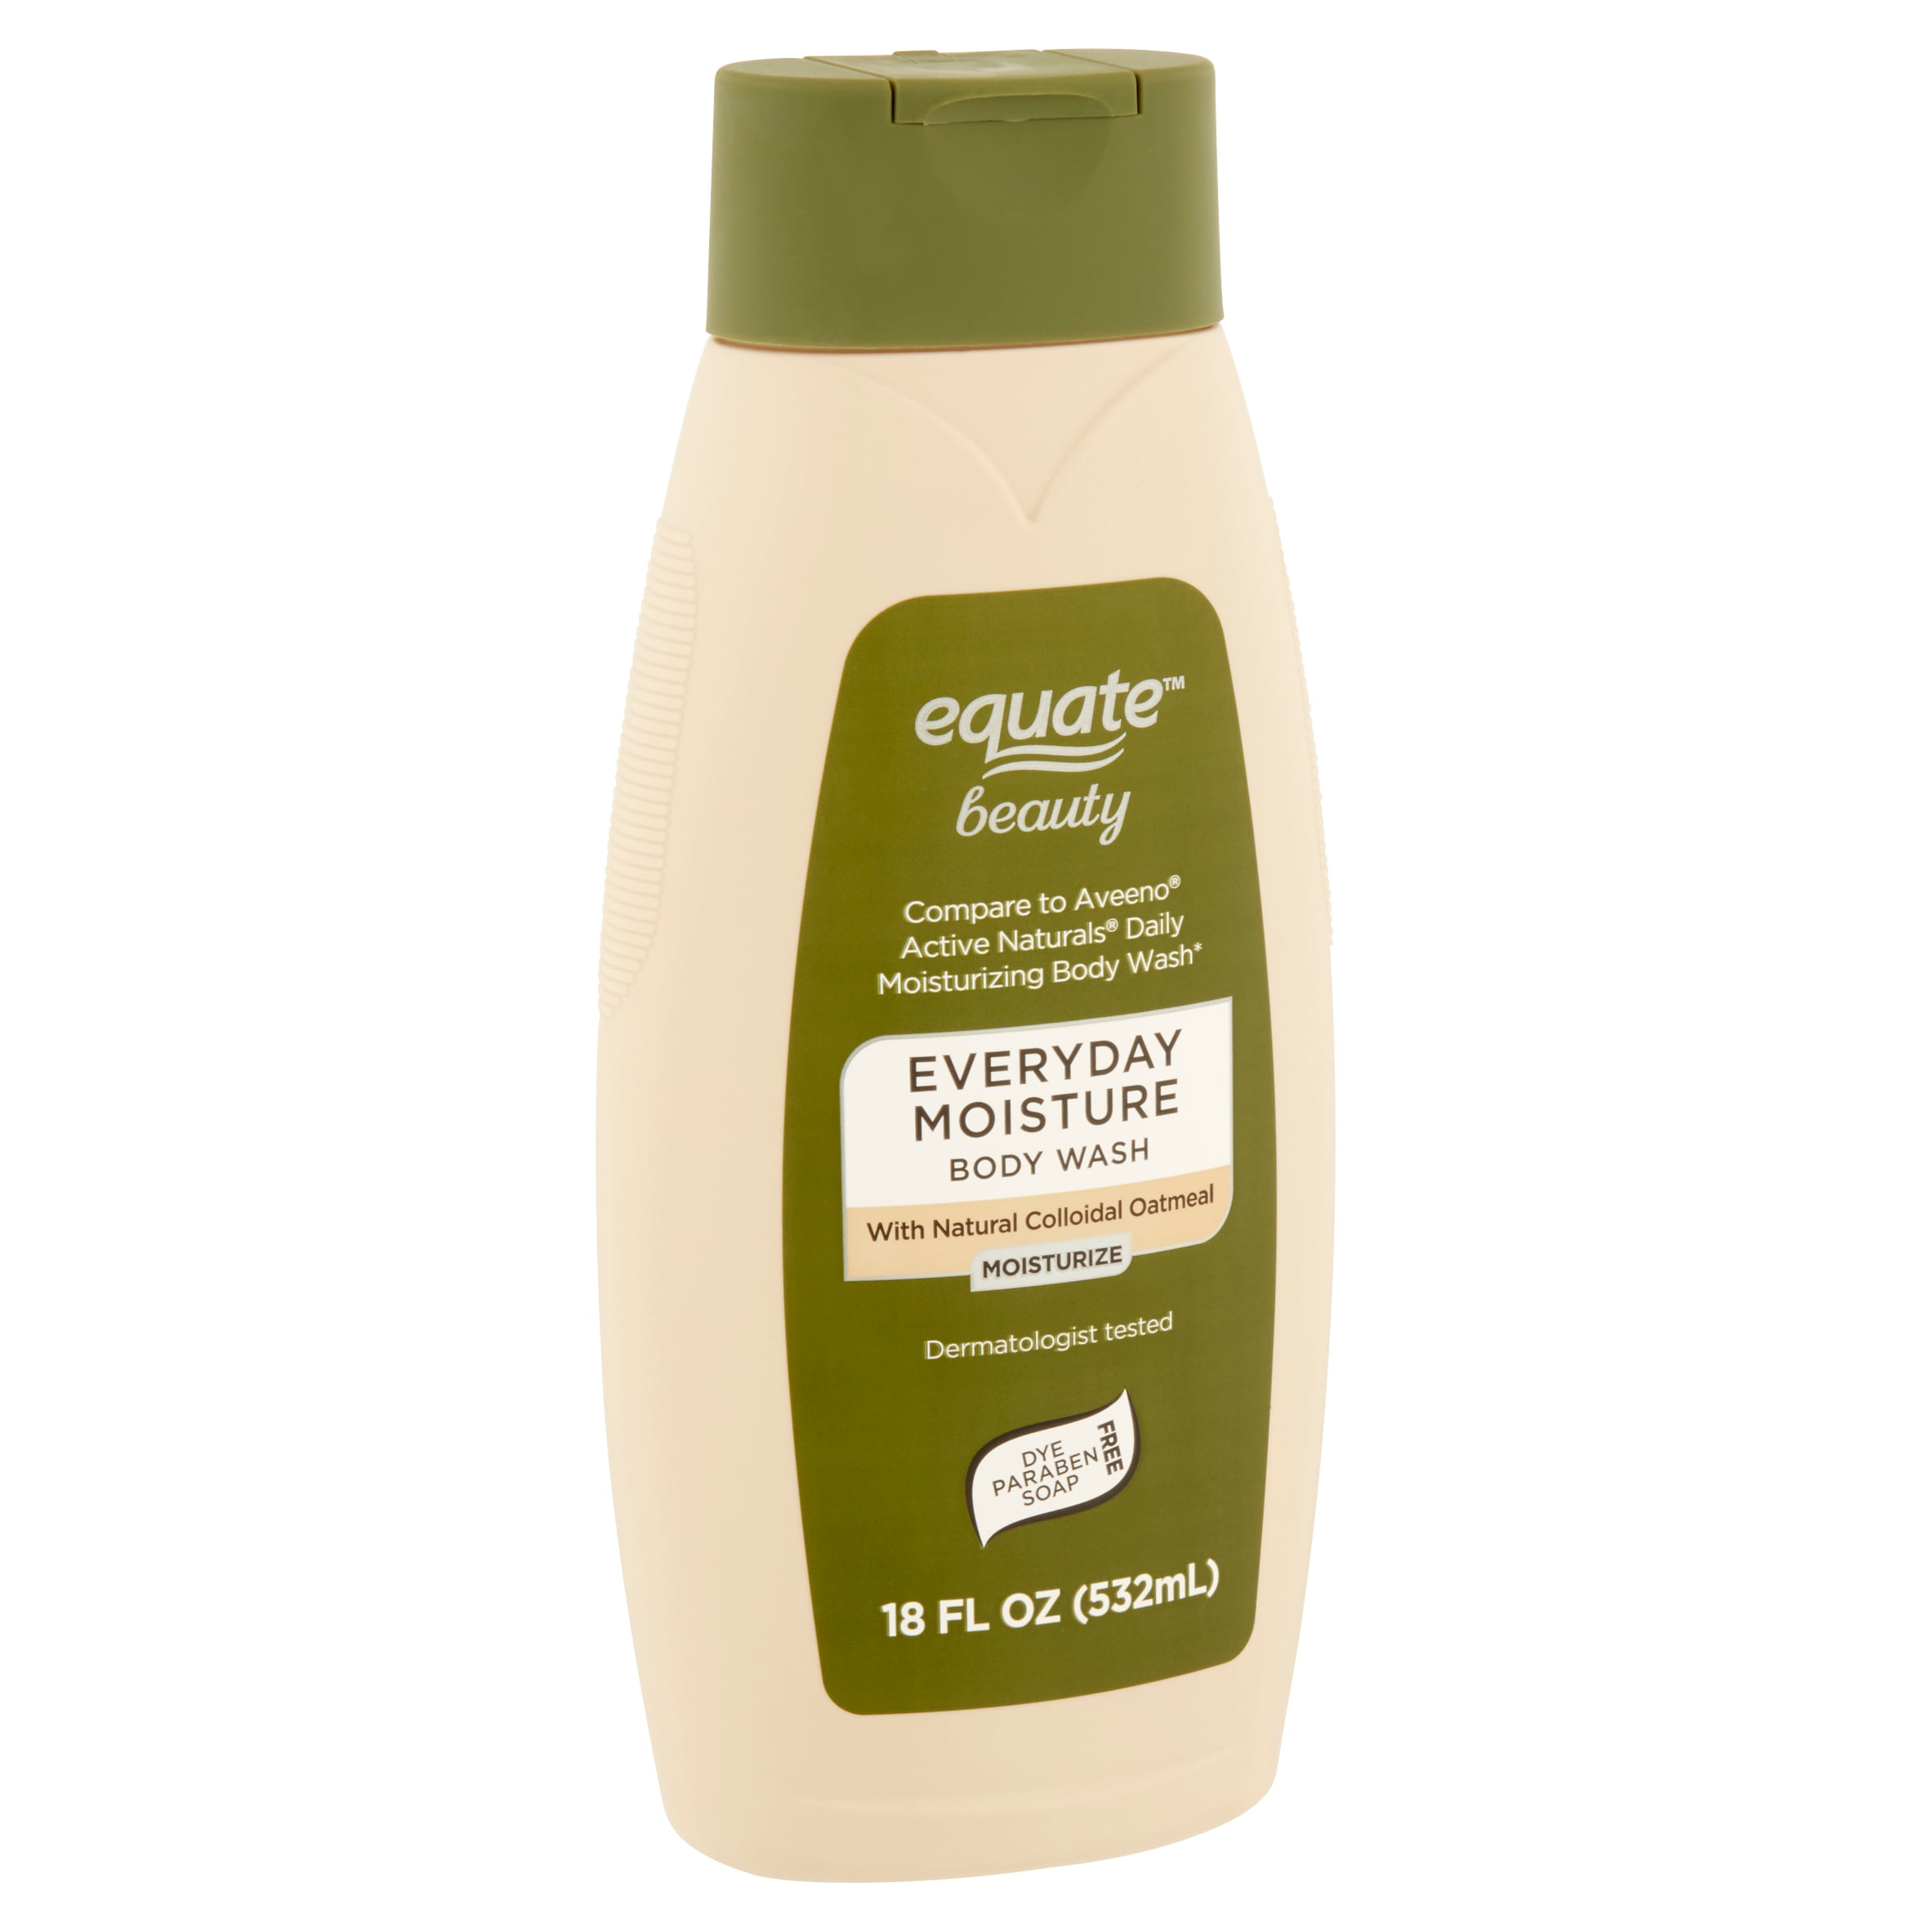 Fight off dry and cracking skin in the shower or bath with Equate Body Wash, Ever...